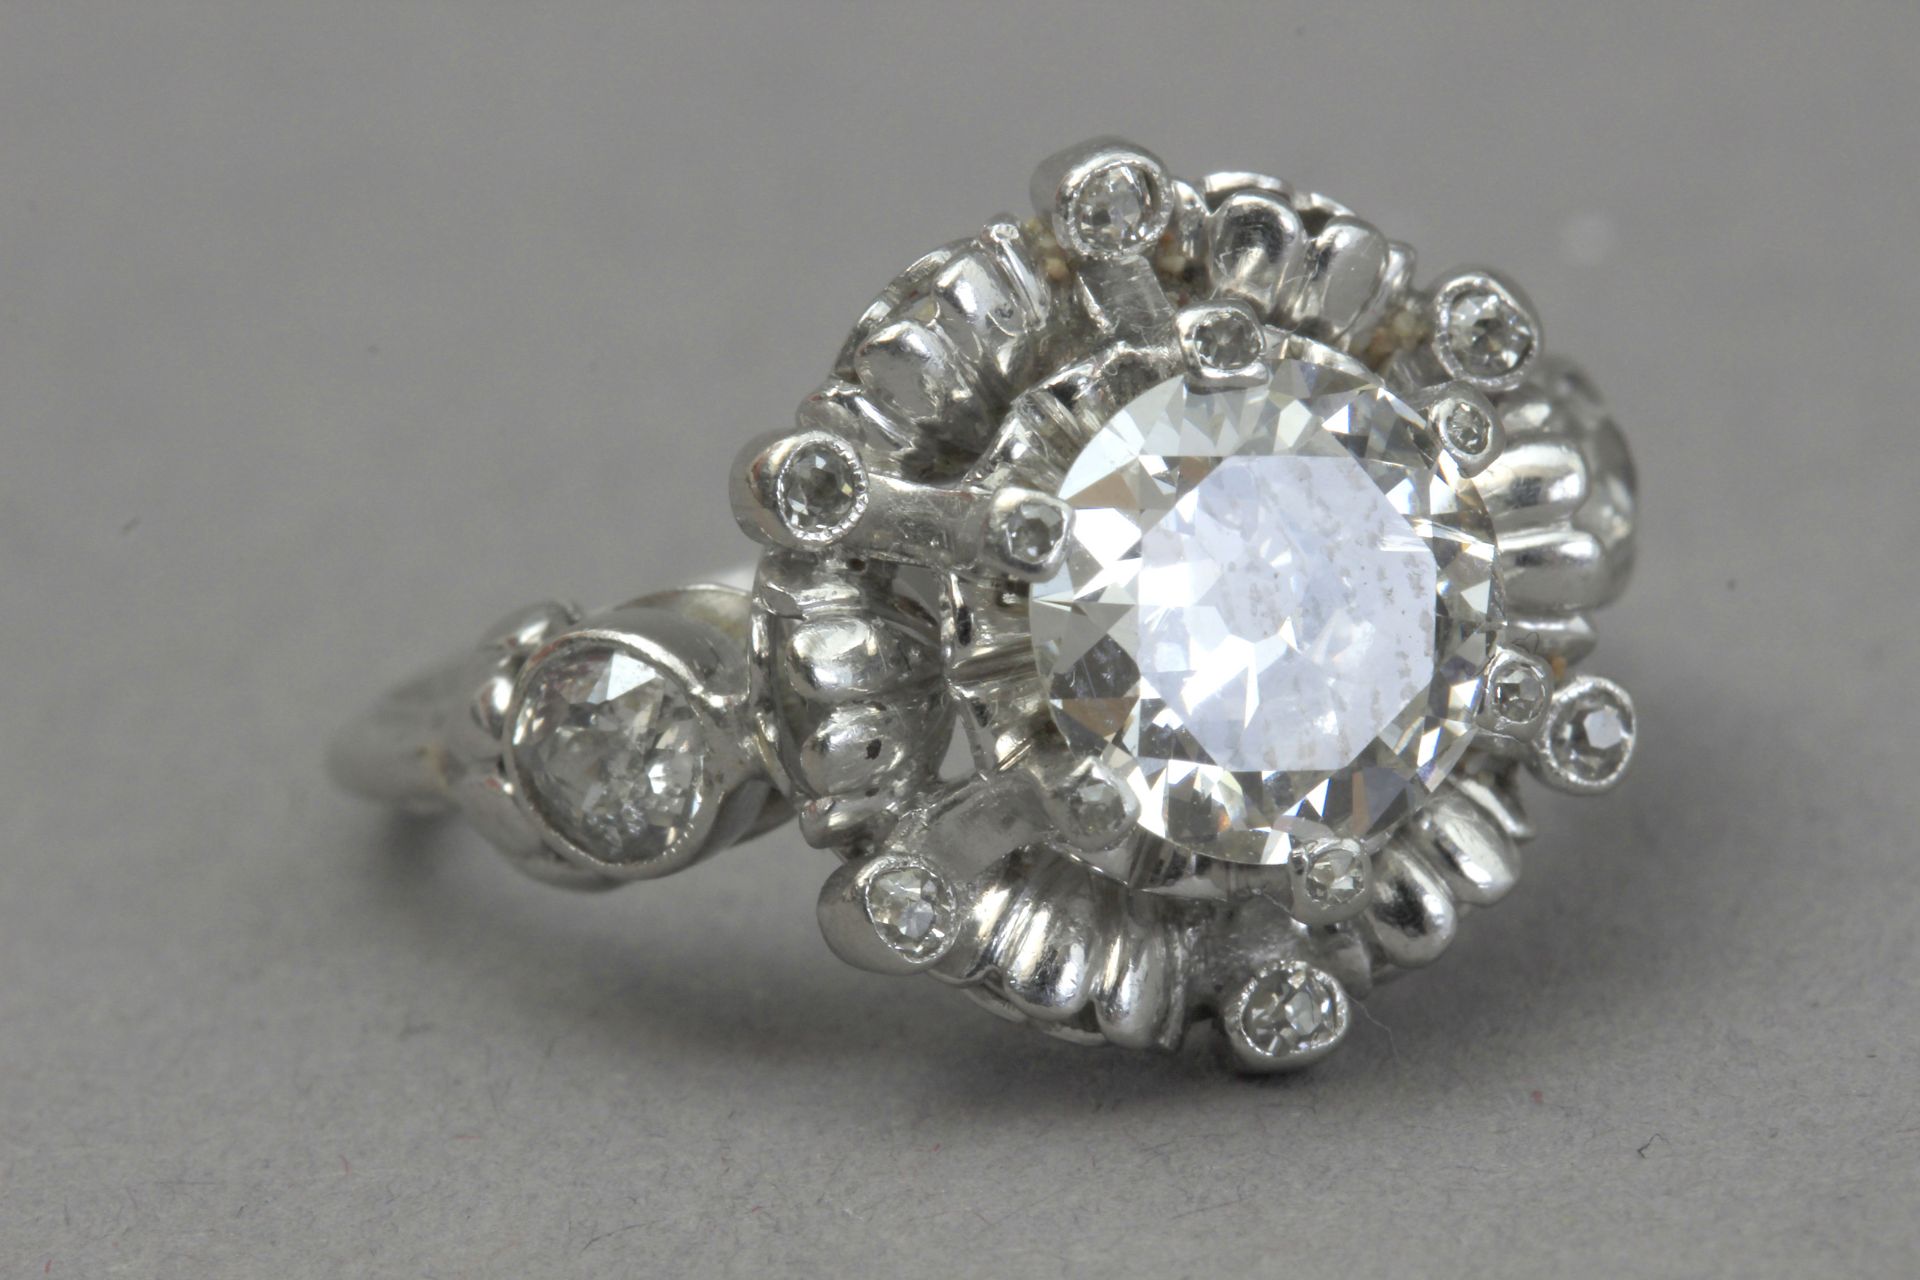 A first half of 20th century 1,75 ct. aprox. Old European cut diamond solitaire ring - Image 4 of 4